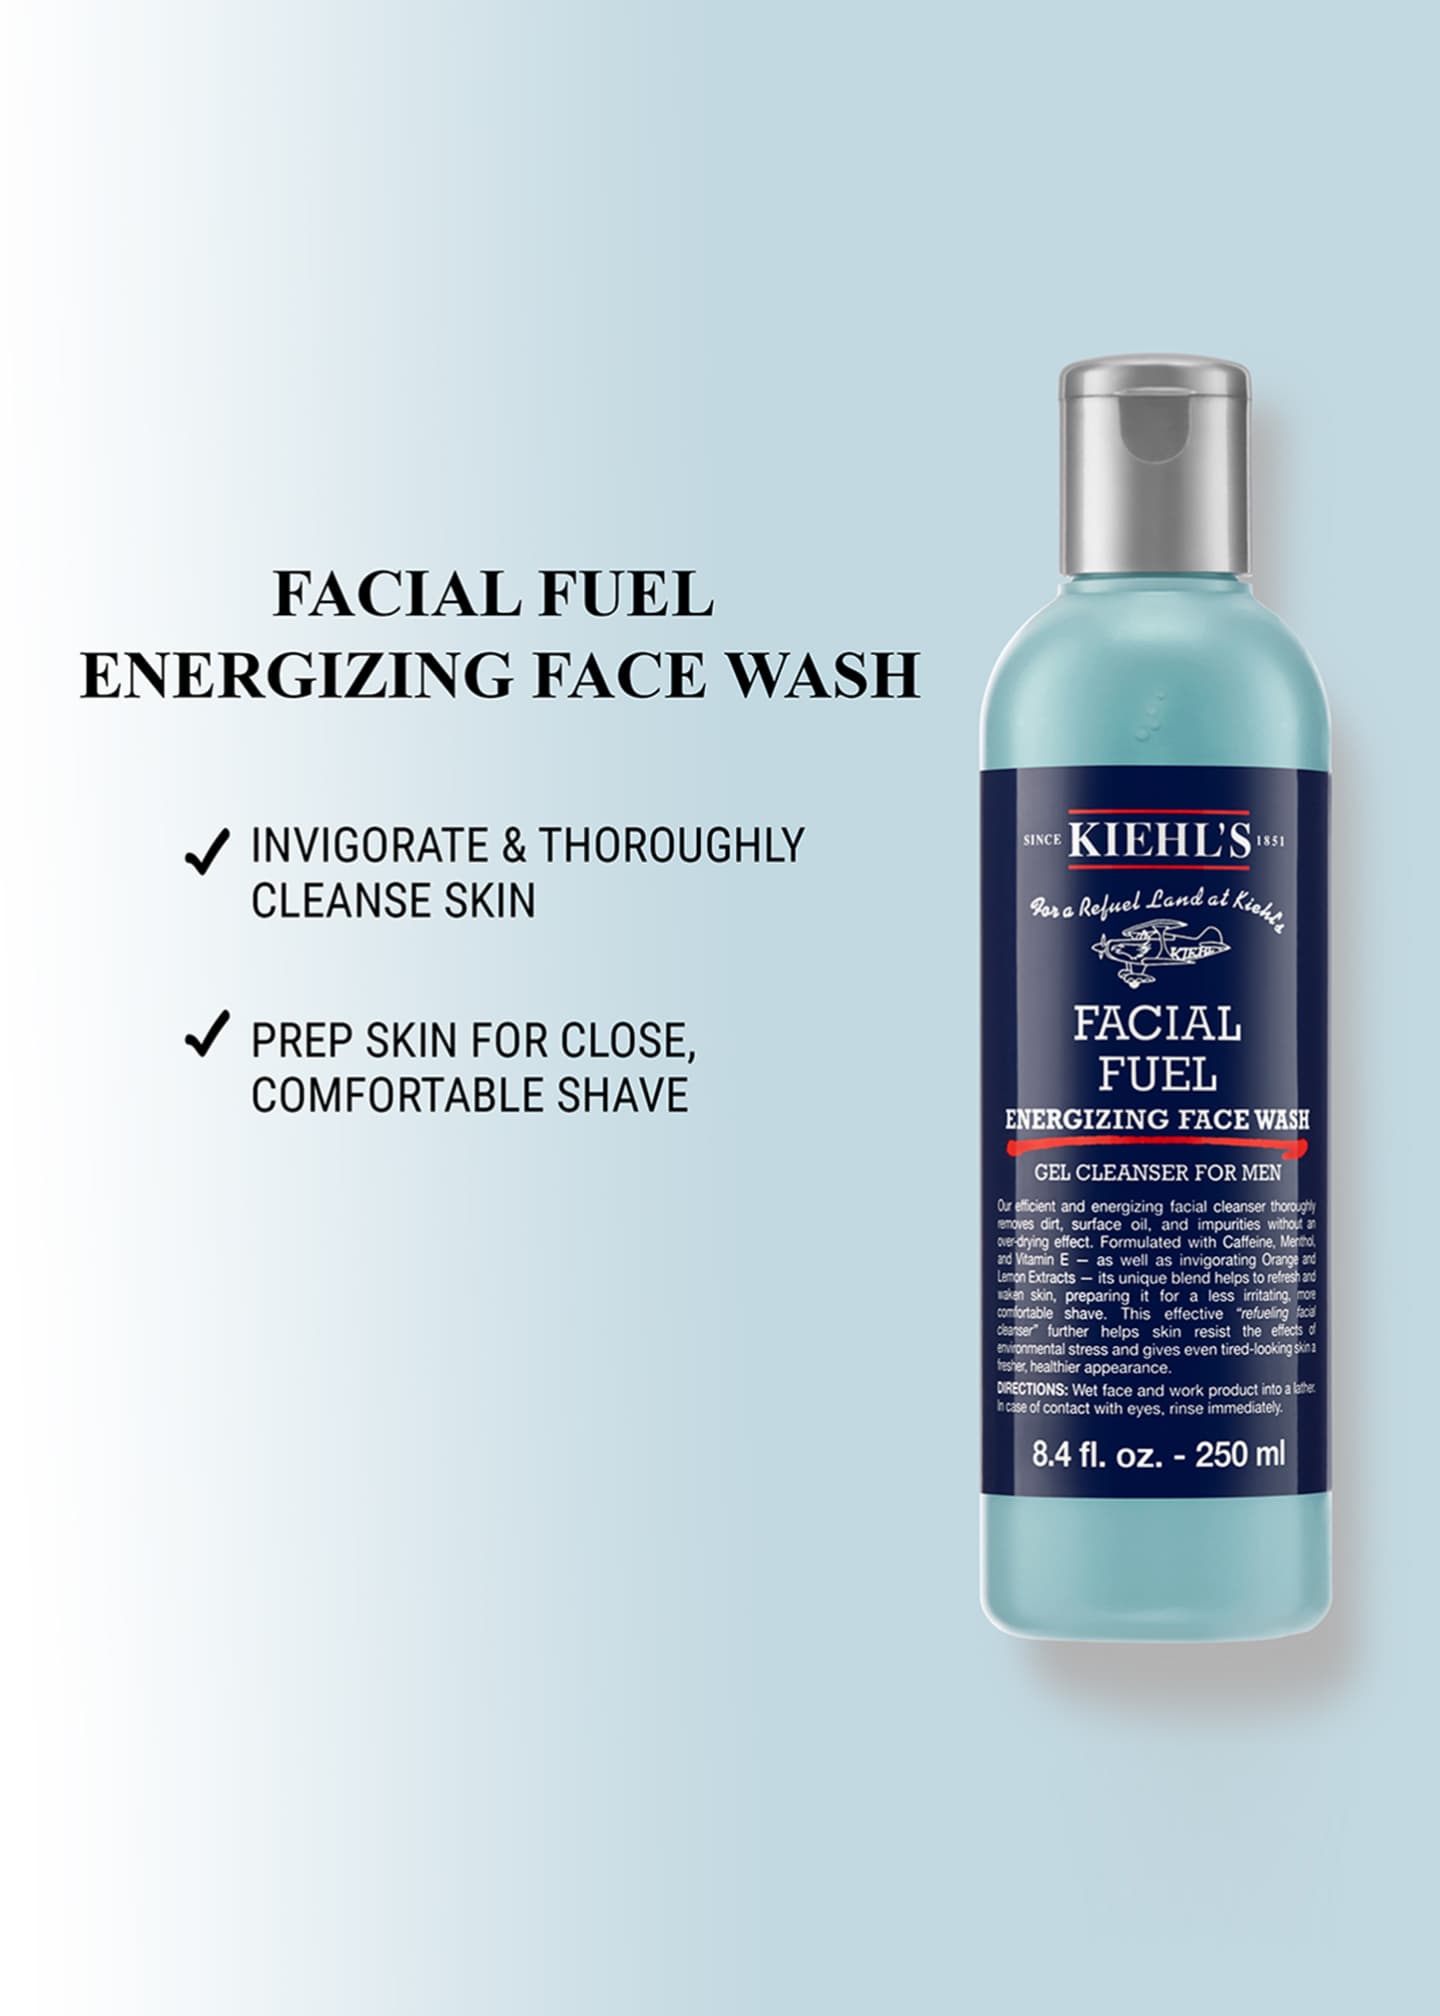 Kiehl's Since 1851 Facial Fuel Energizing Face Wash, 8.4 oz. Image 2 of 5